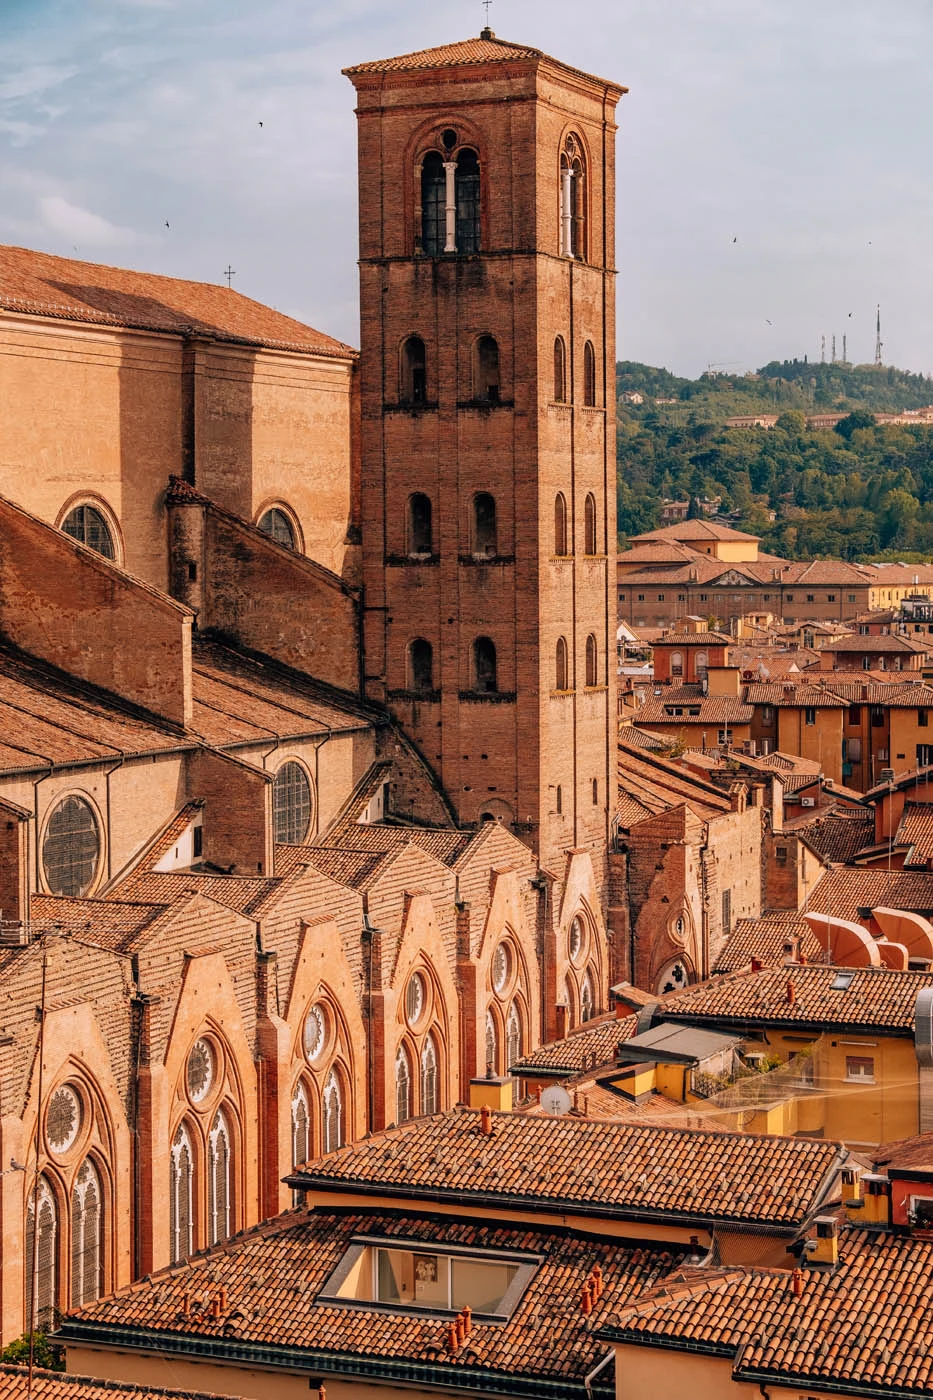 Things to Do in Bologna - Basilica di San Petronio Bell Tower